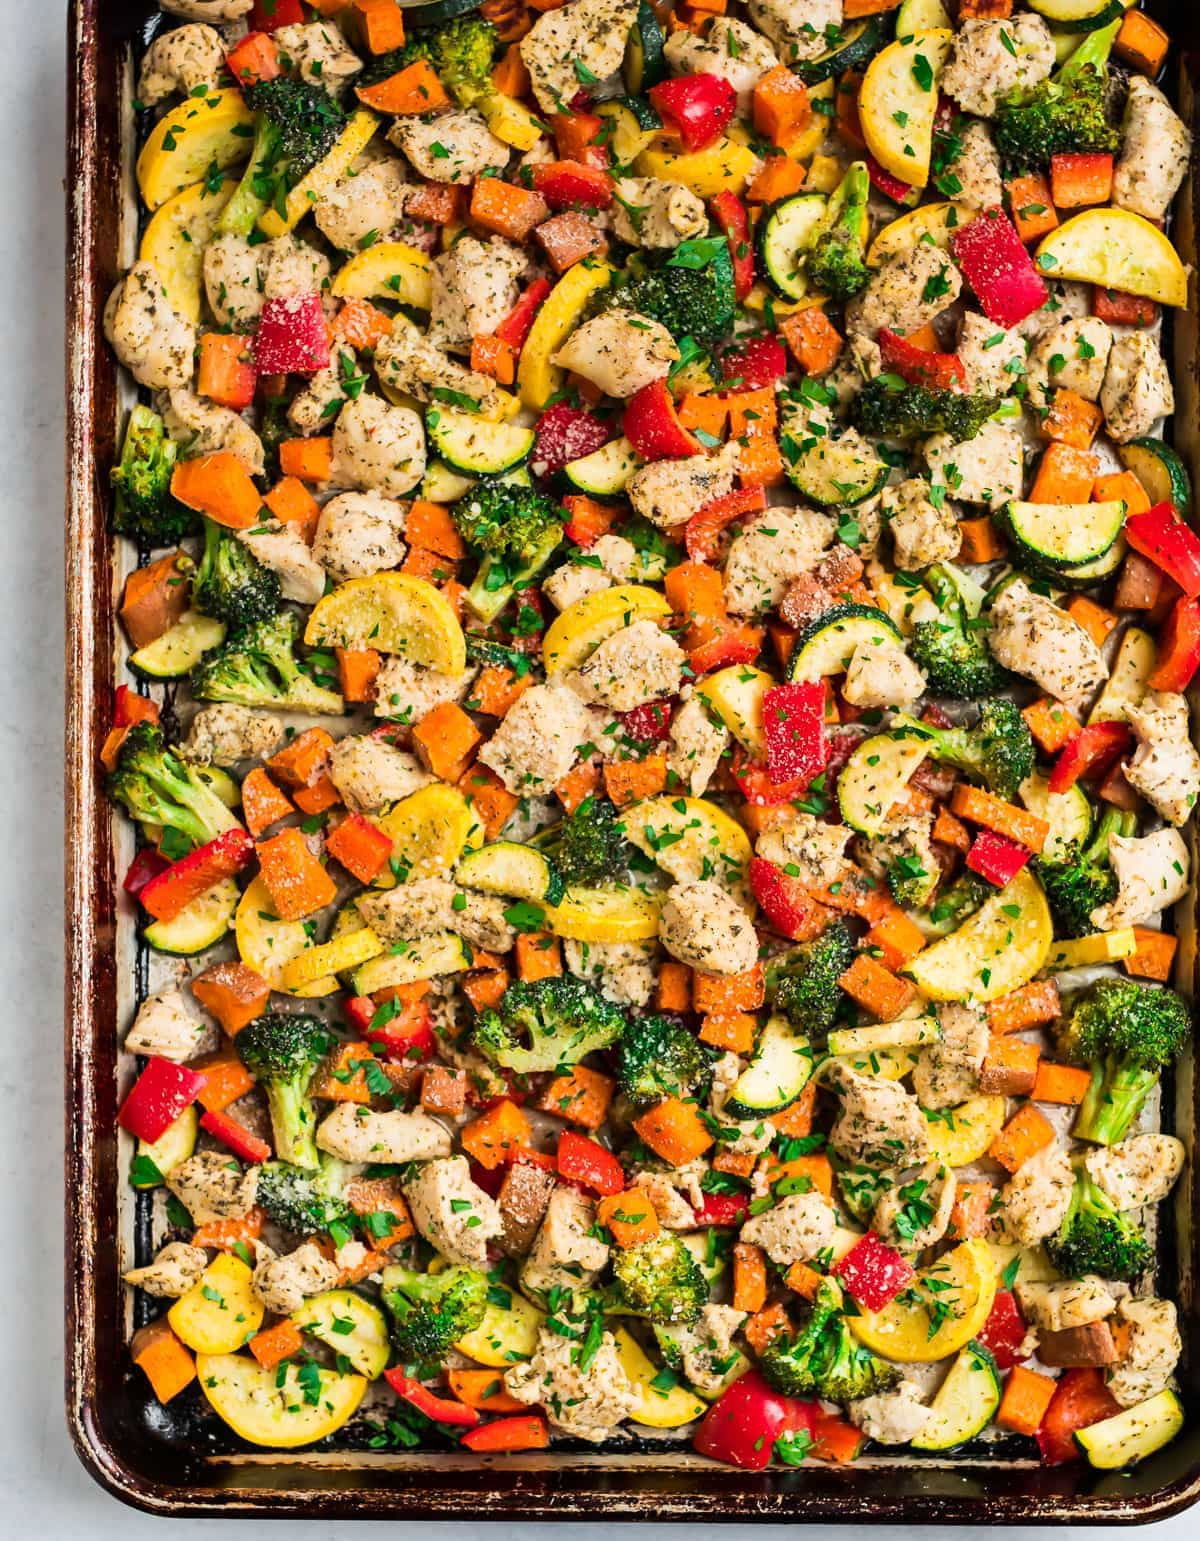 Oven baked Sheet Pan Chicken with Broccoli, Sweet Potatoes, and Zucchini and a lemon garlic Parmesan topping.